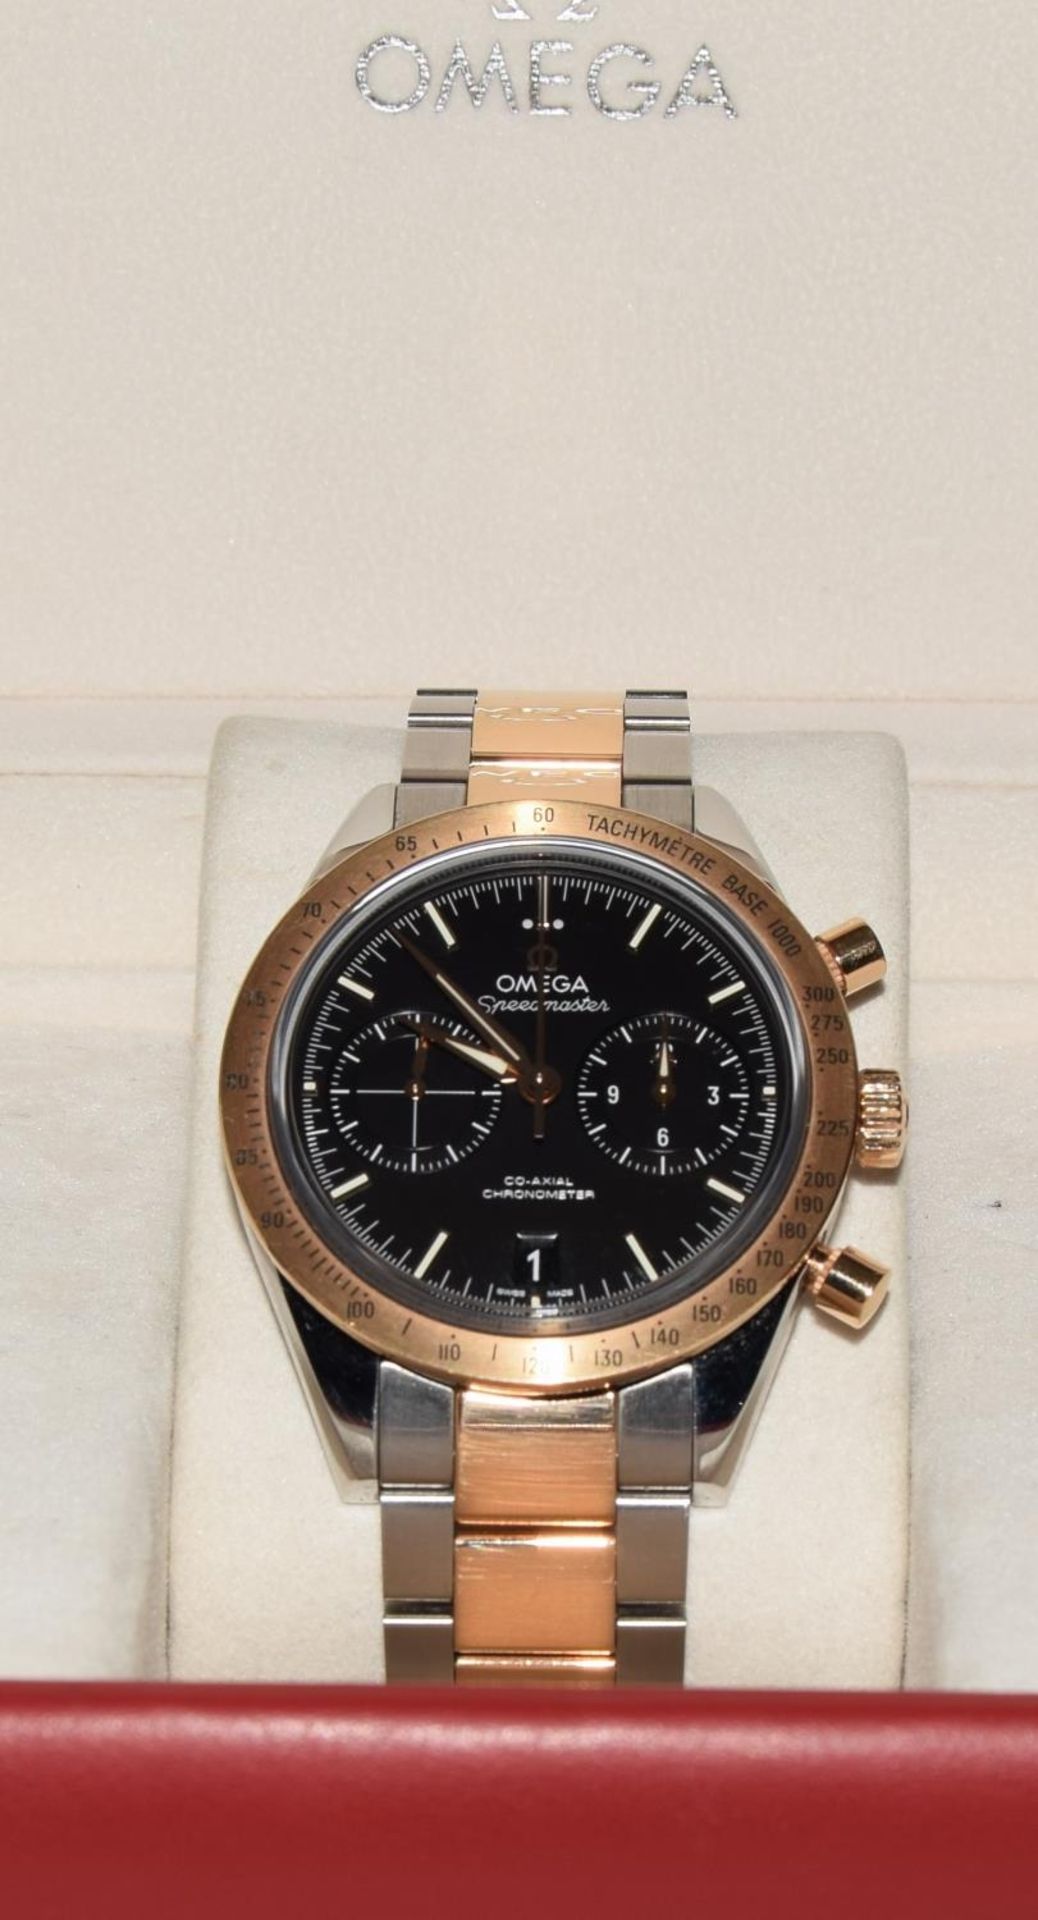 Omega Speedmaster Bi-Metal chronograph ref 33120425101002, Box and Papers. (ref 68) - Image 8 of 9